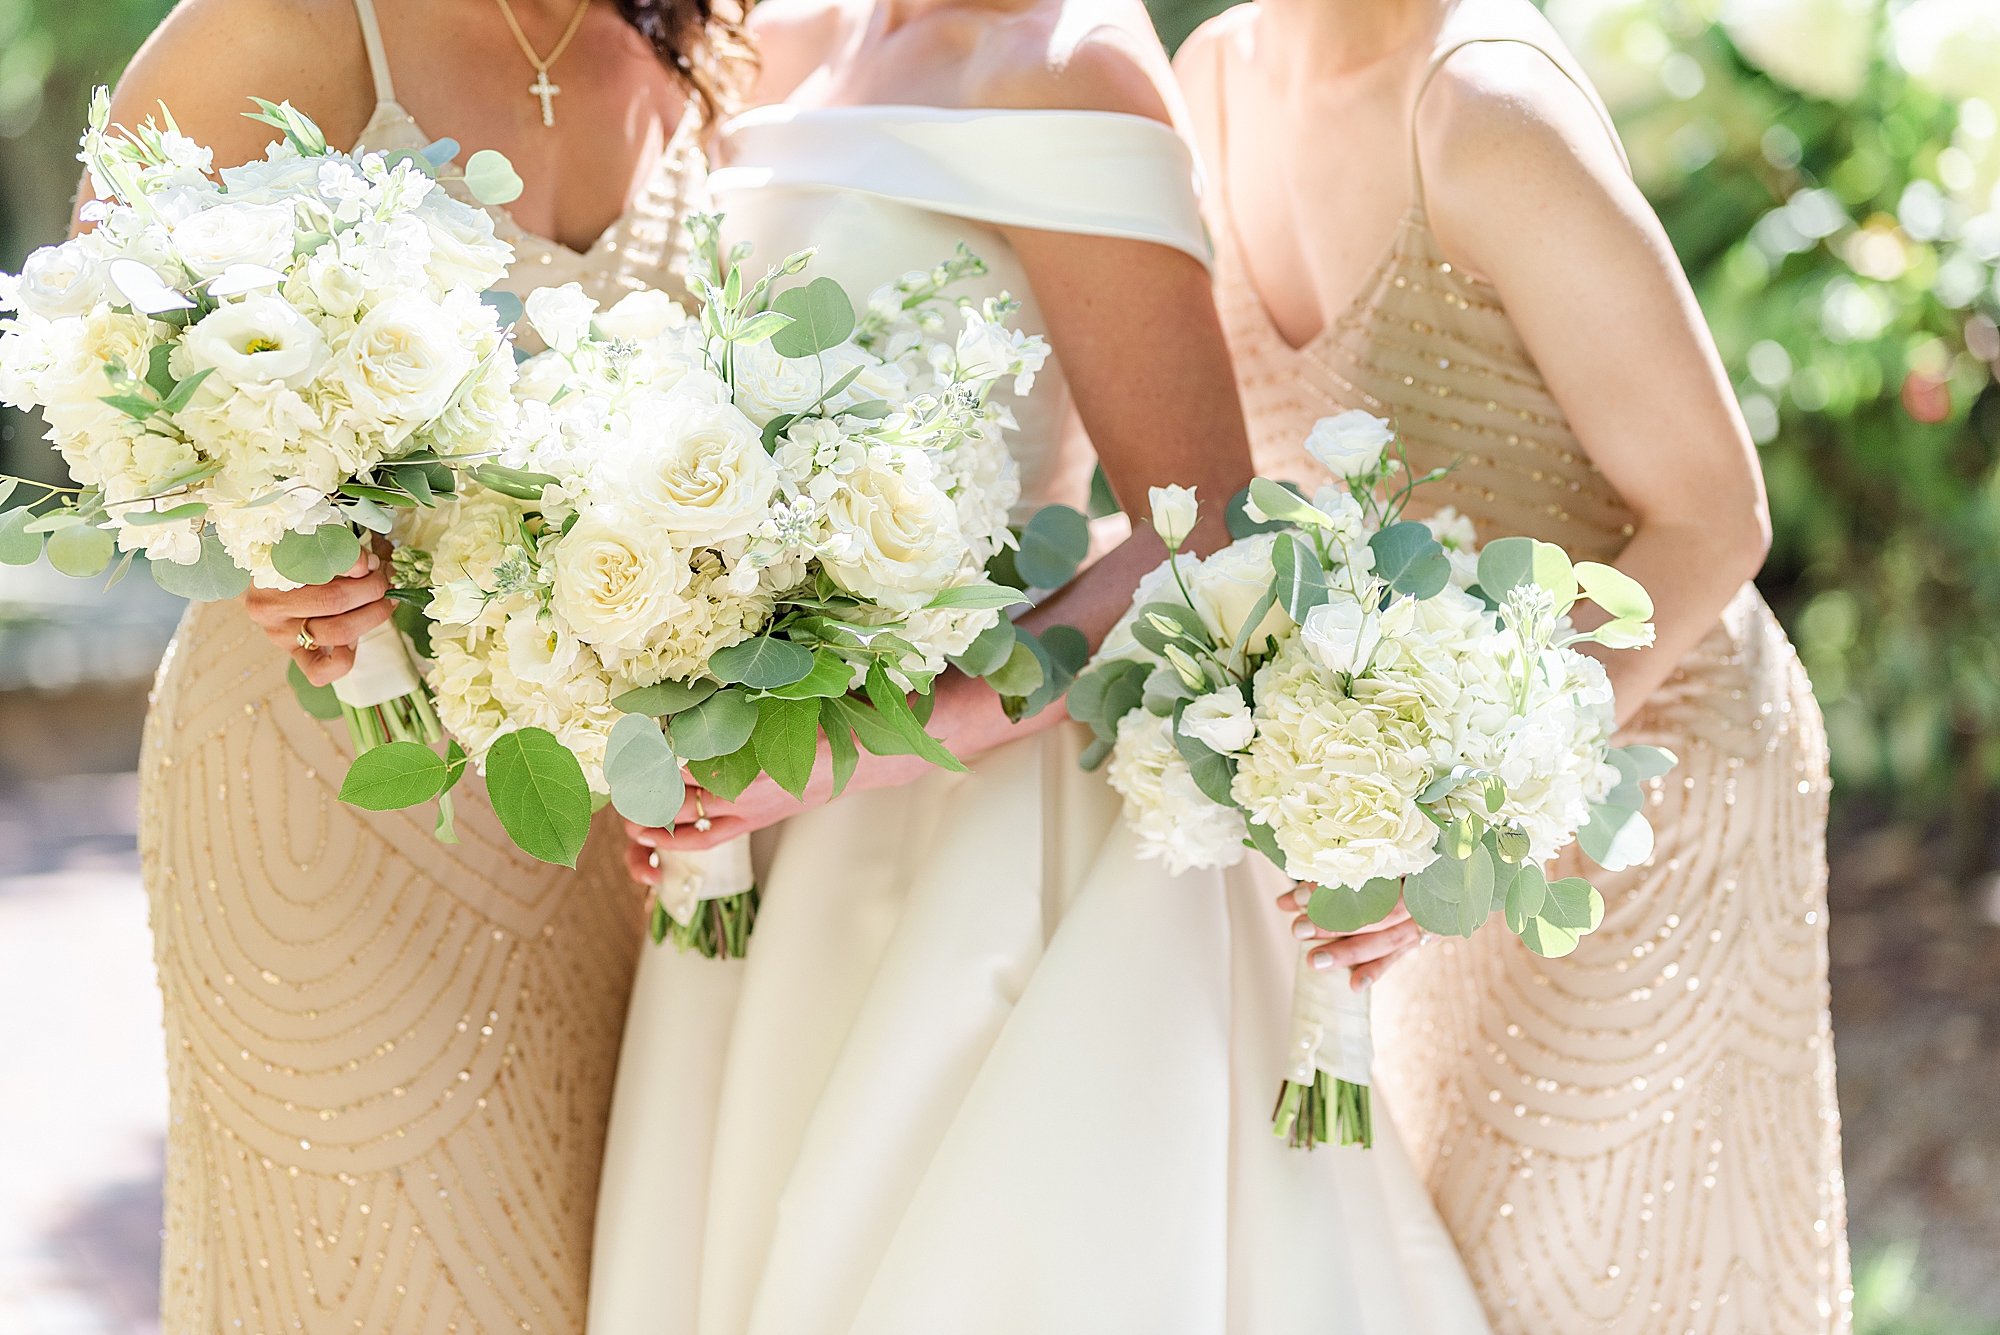 all-white bouquets for bride and bridesmaids